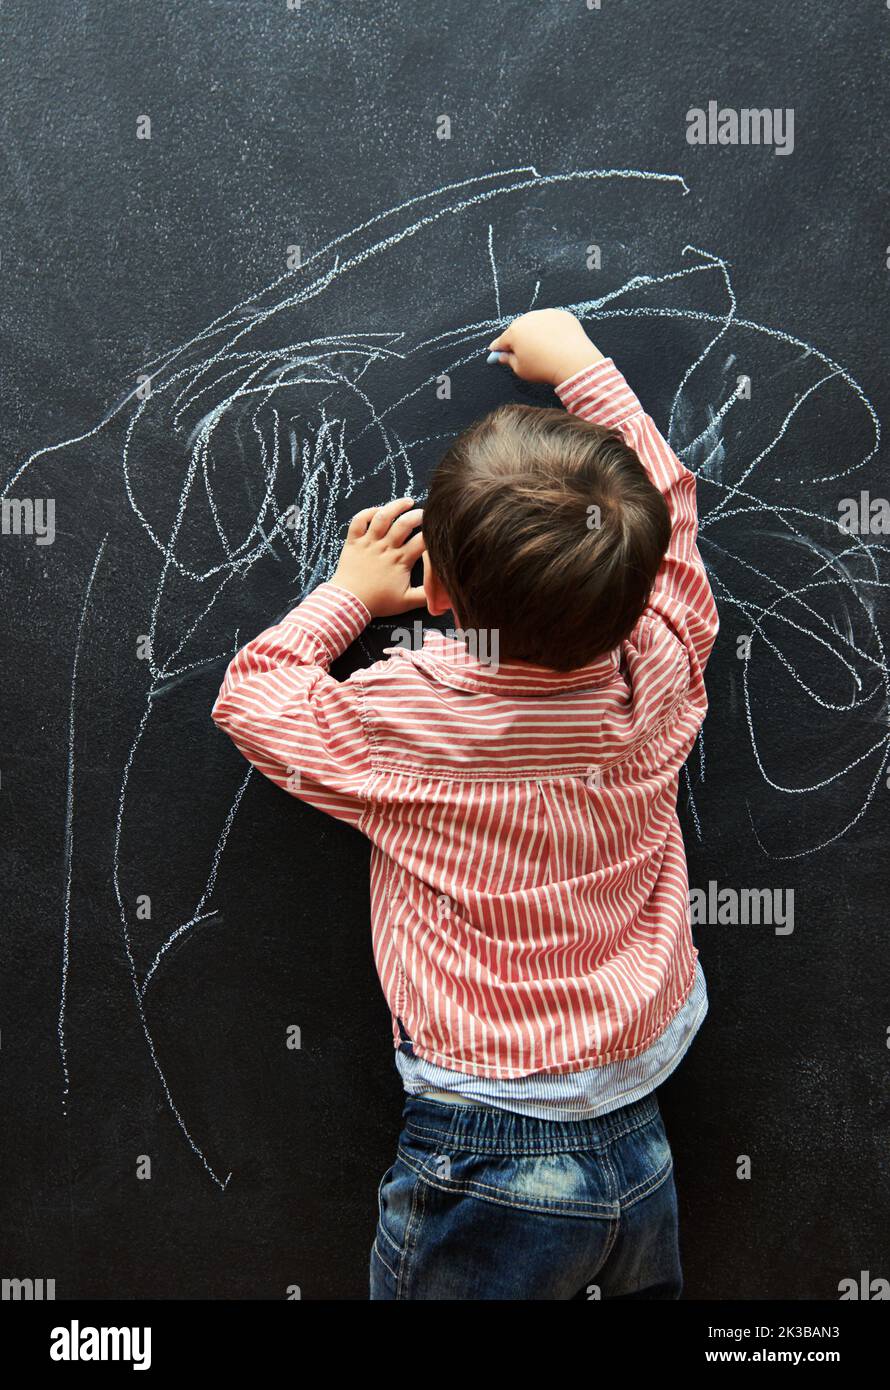 Ill call this piece Life. a little boy scribbling on a blackboard with chalk. Stock Photo